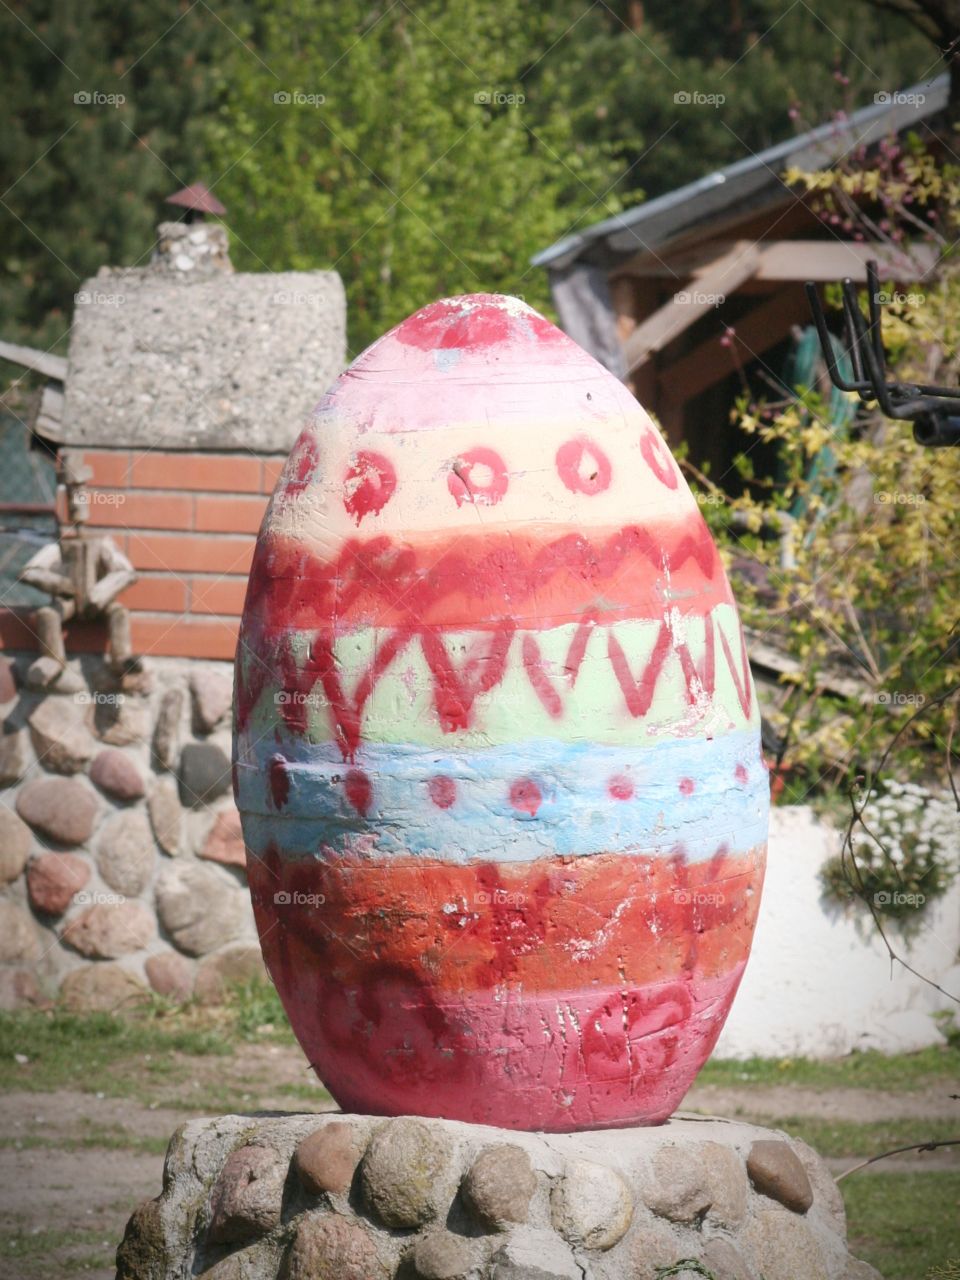 XXL size Easter Egg!